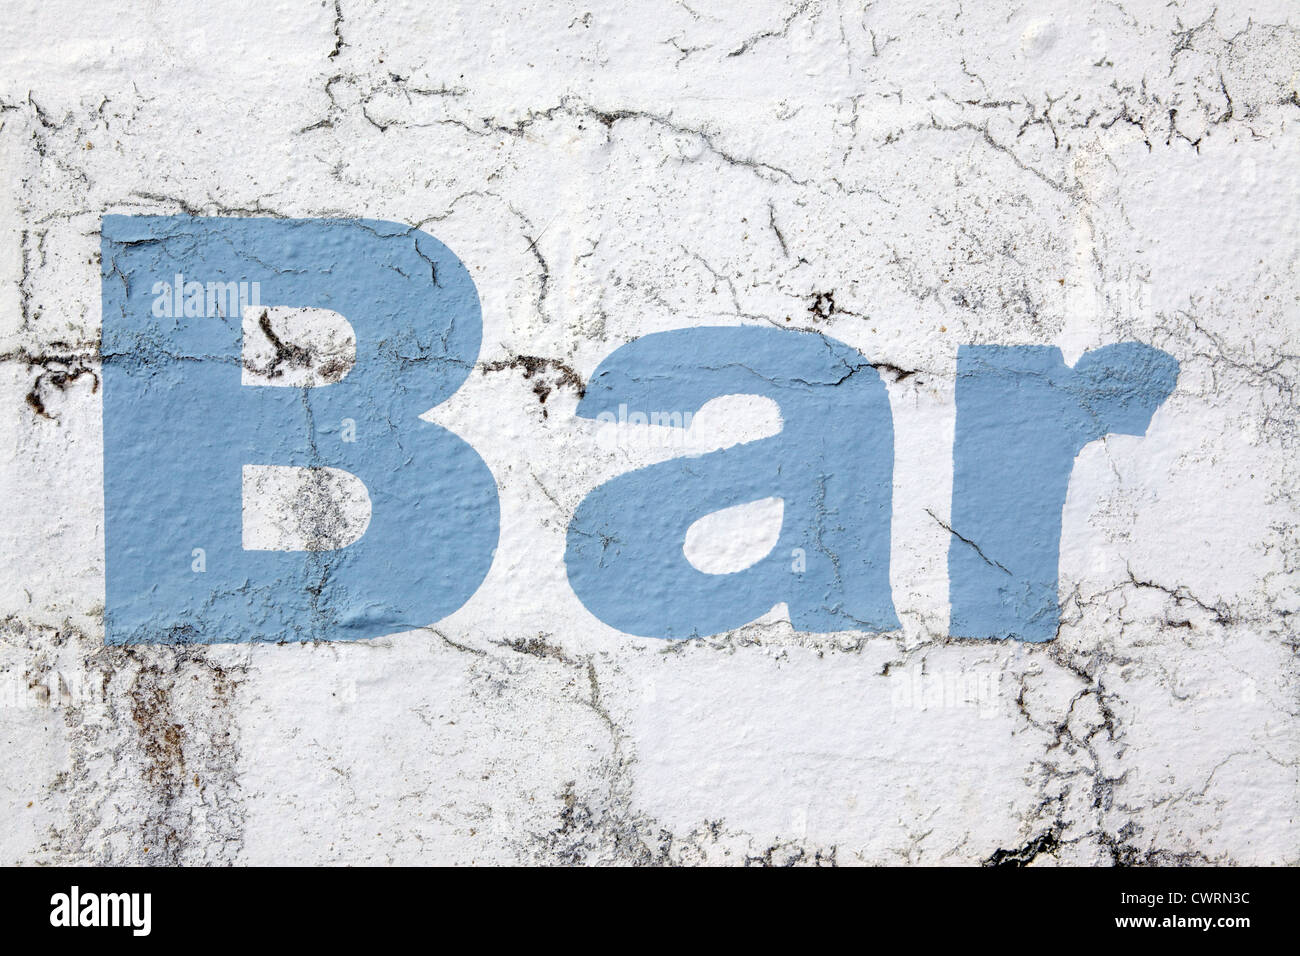 Lettering 'Bar', stencil style sky blue paint on a white washed wall background, crumbling and distressed look, Cornwall, UK Stock Photo